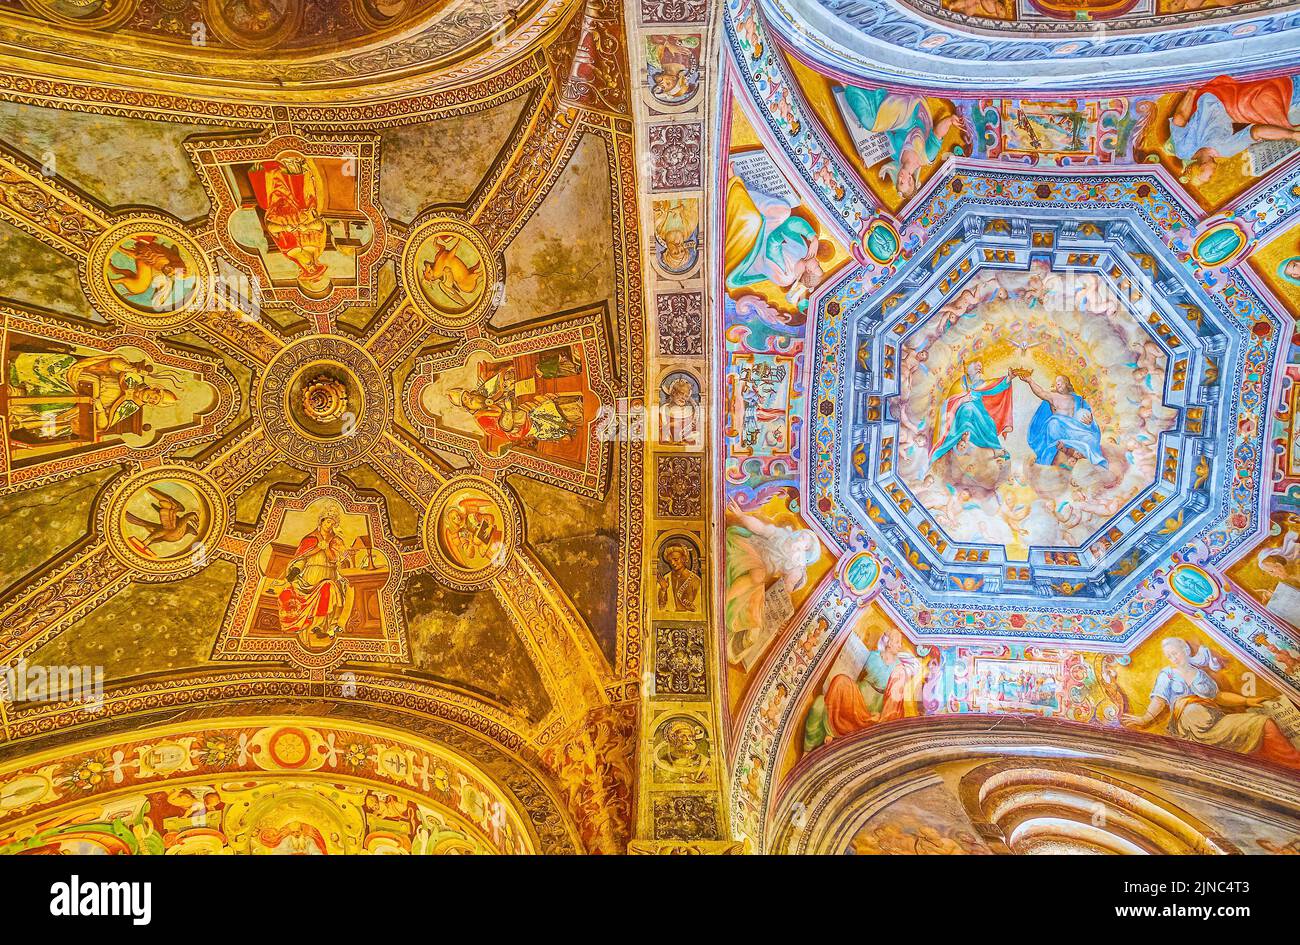 PAVIA, ITALY - APRIL 9, 2022: The vault with colorful frescoes of San Michele Maggiore Basilica, on April 9 in Pavia, Italy Stock Photo